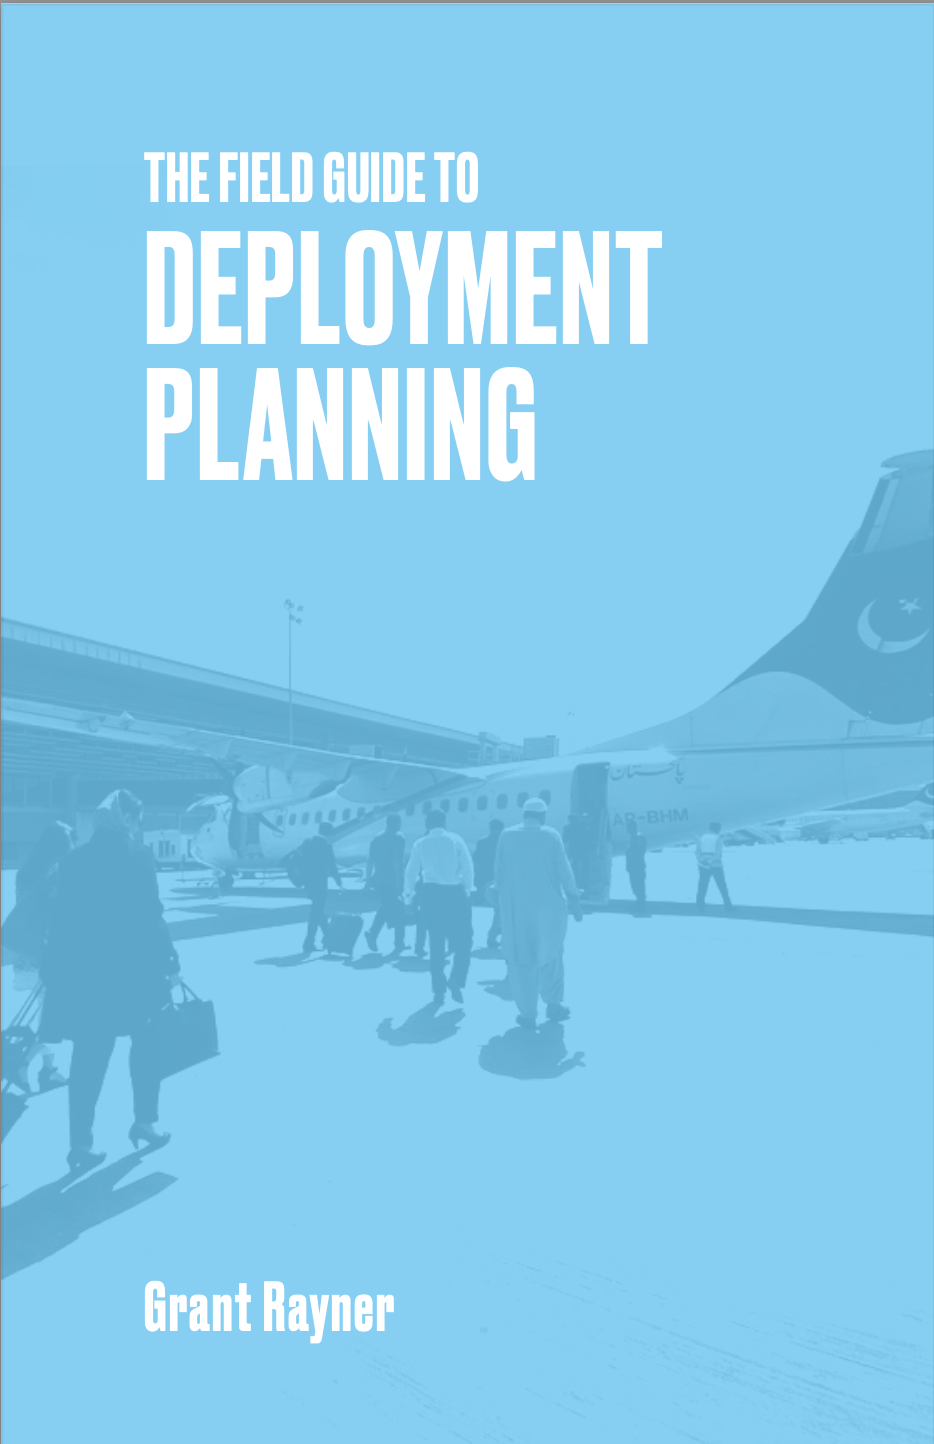 The Field Guide to Deployment Planning